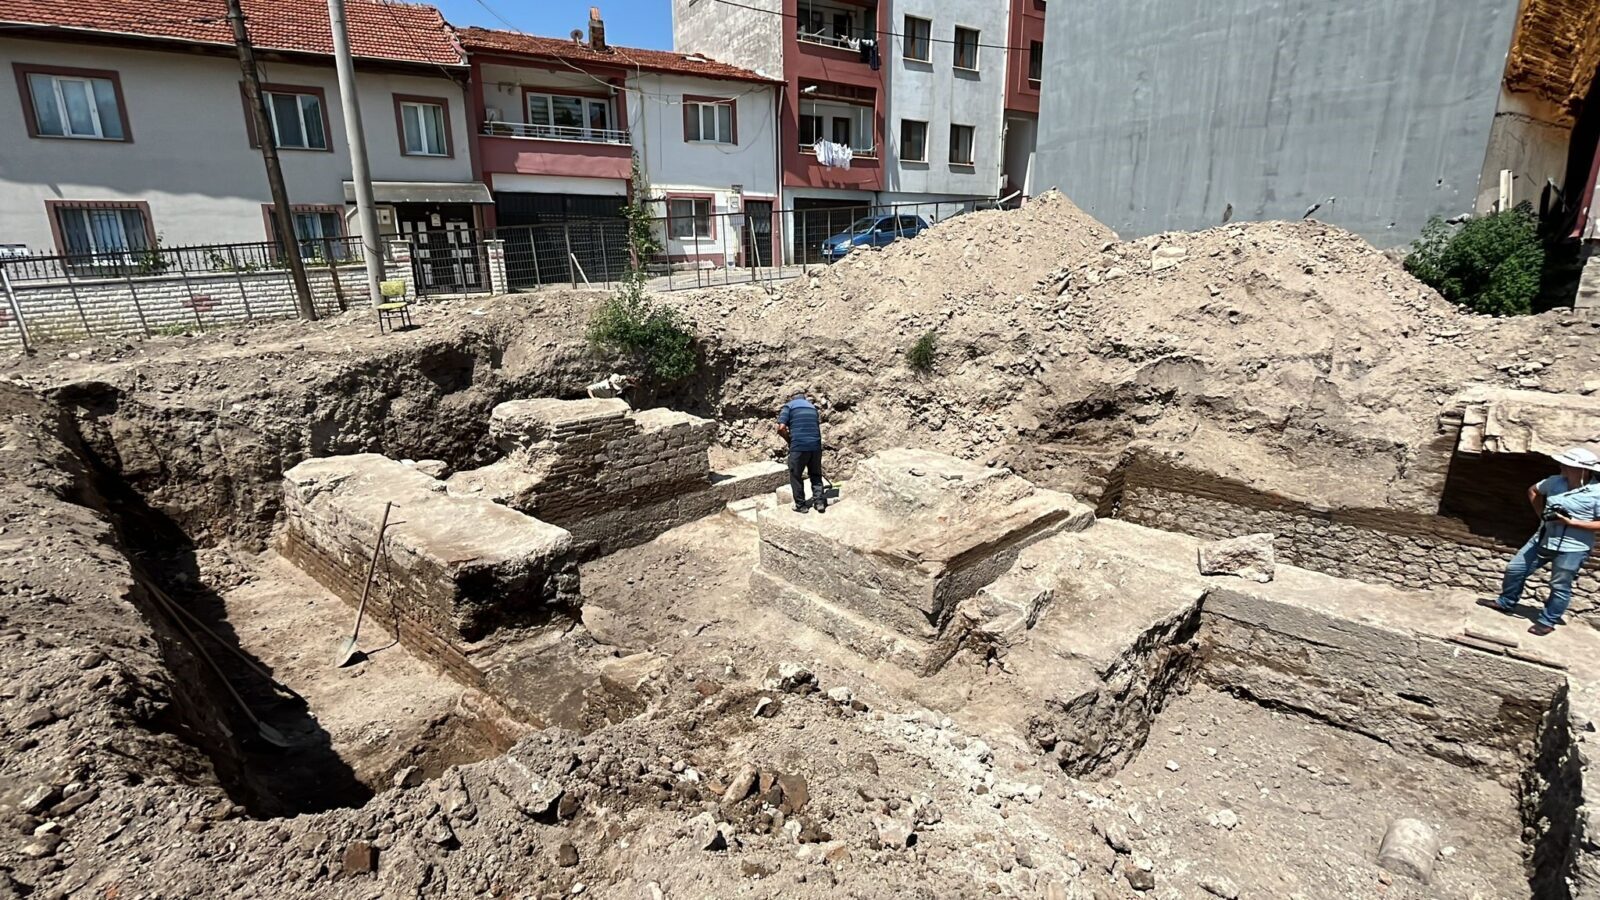 Ancient Roman bathhouse discovered during construction in Bolu